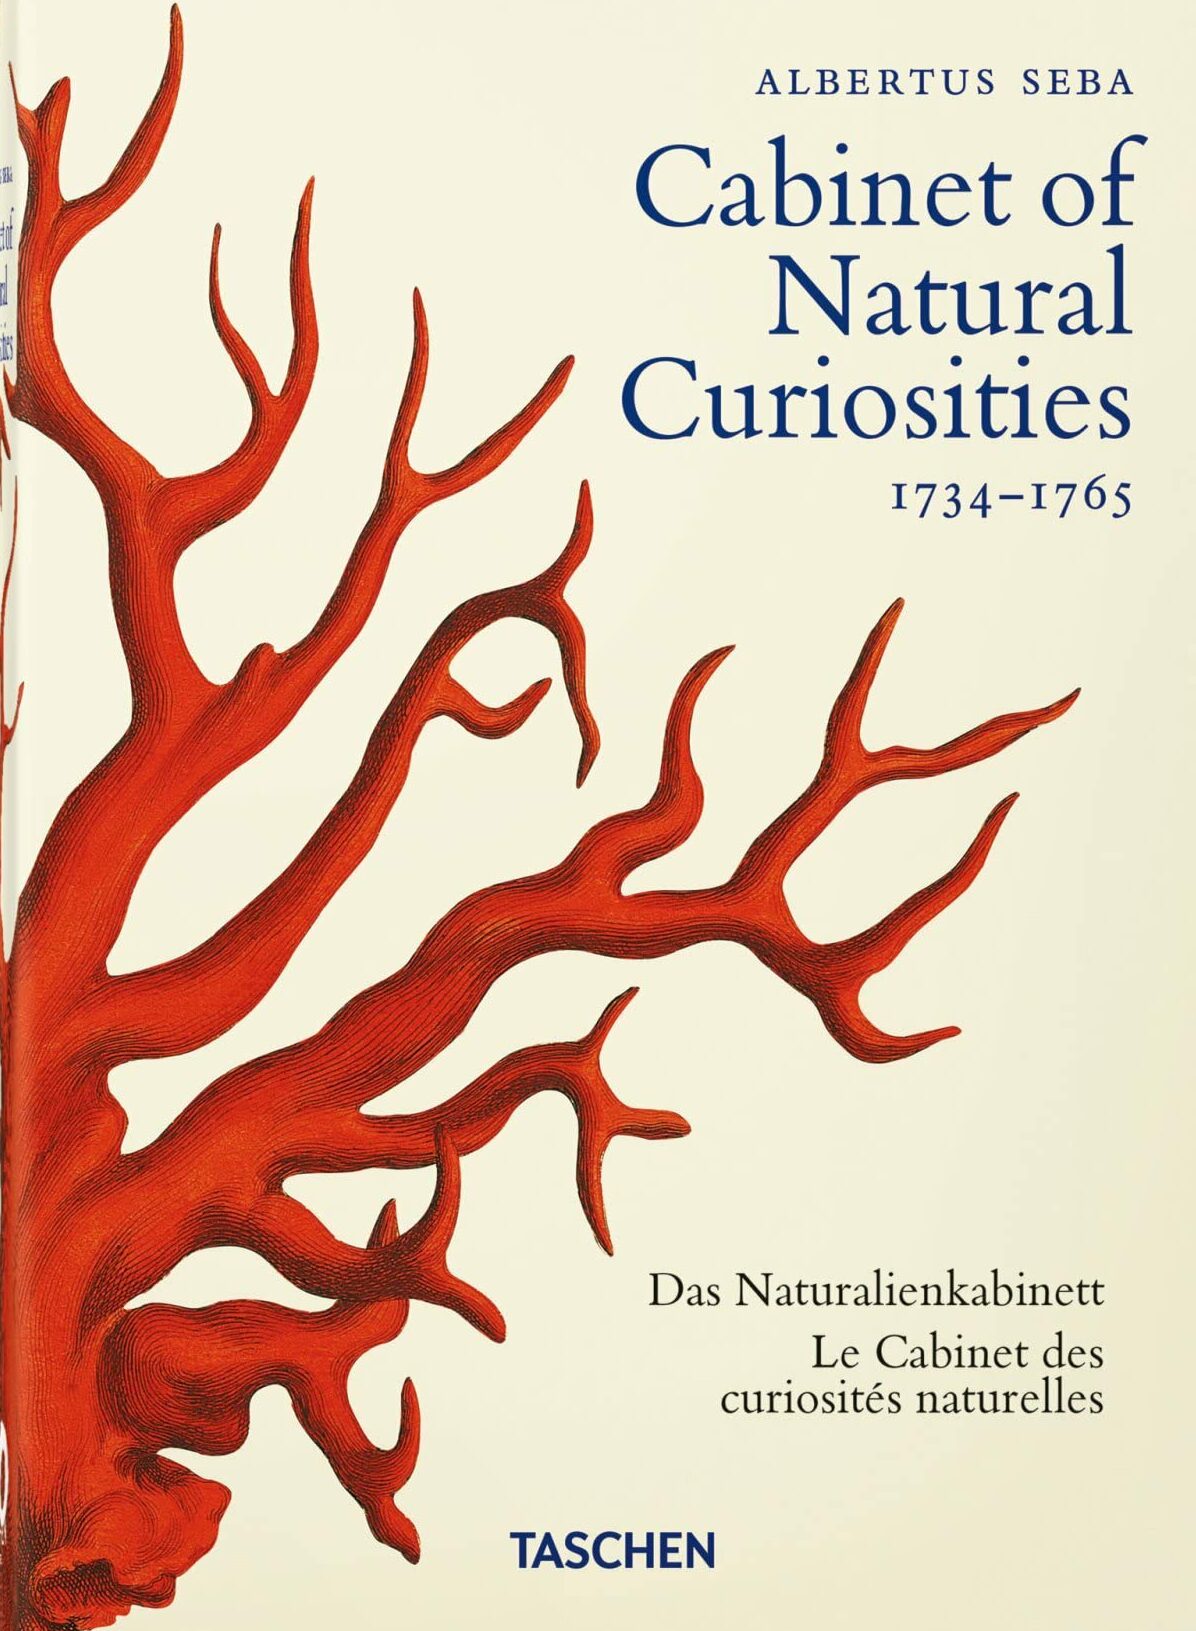 Cabinet of Natural Curiosities. 40 series